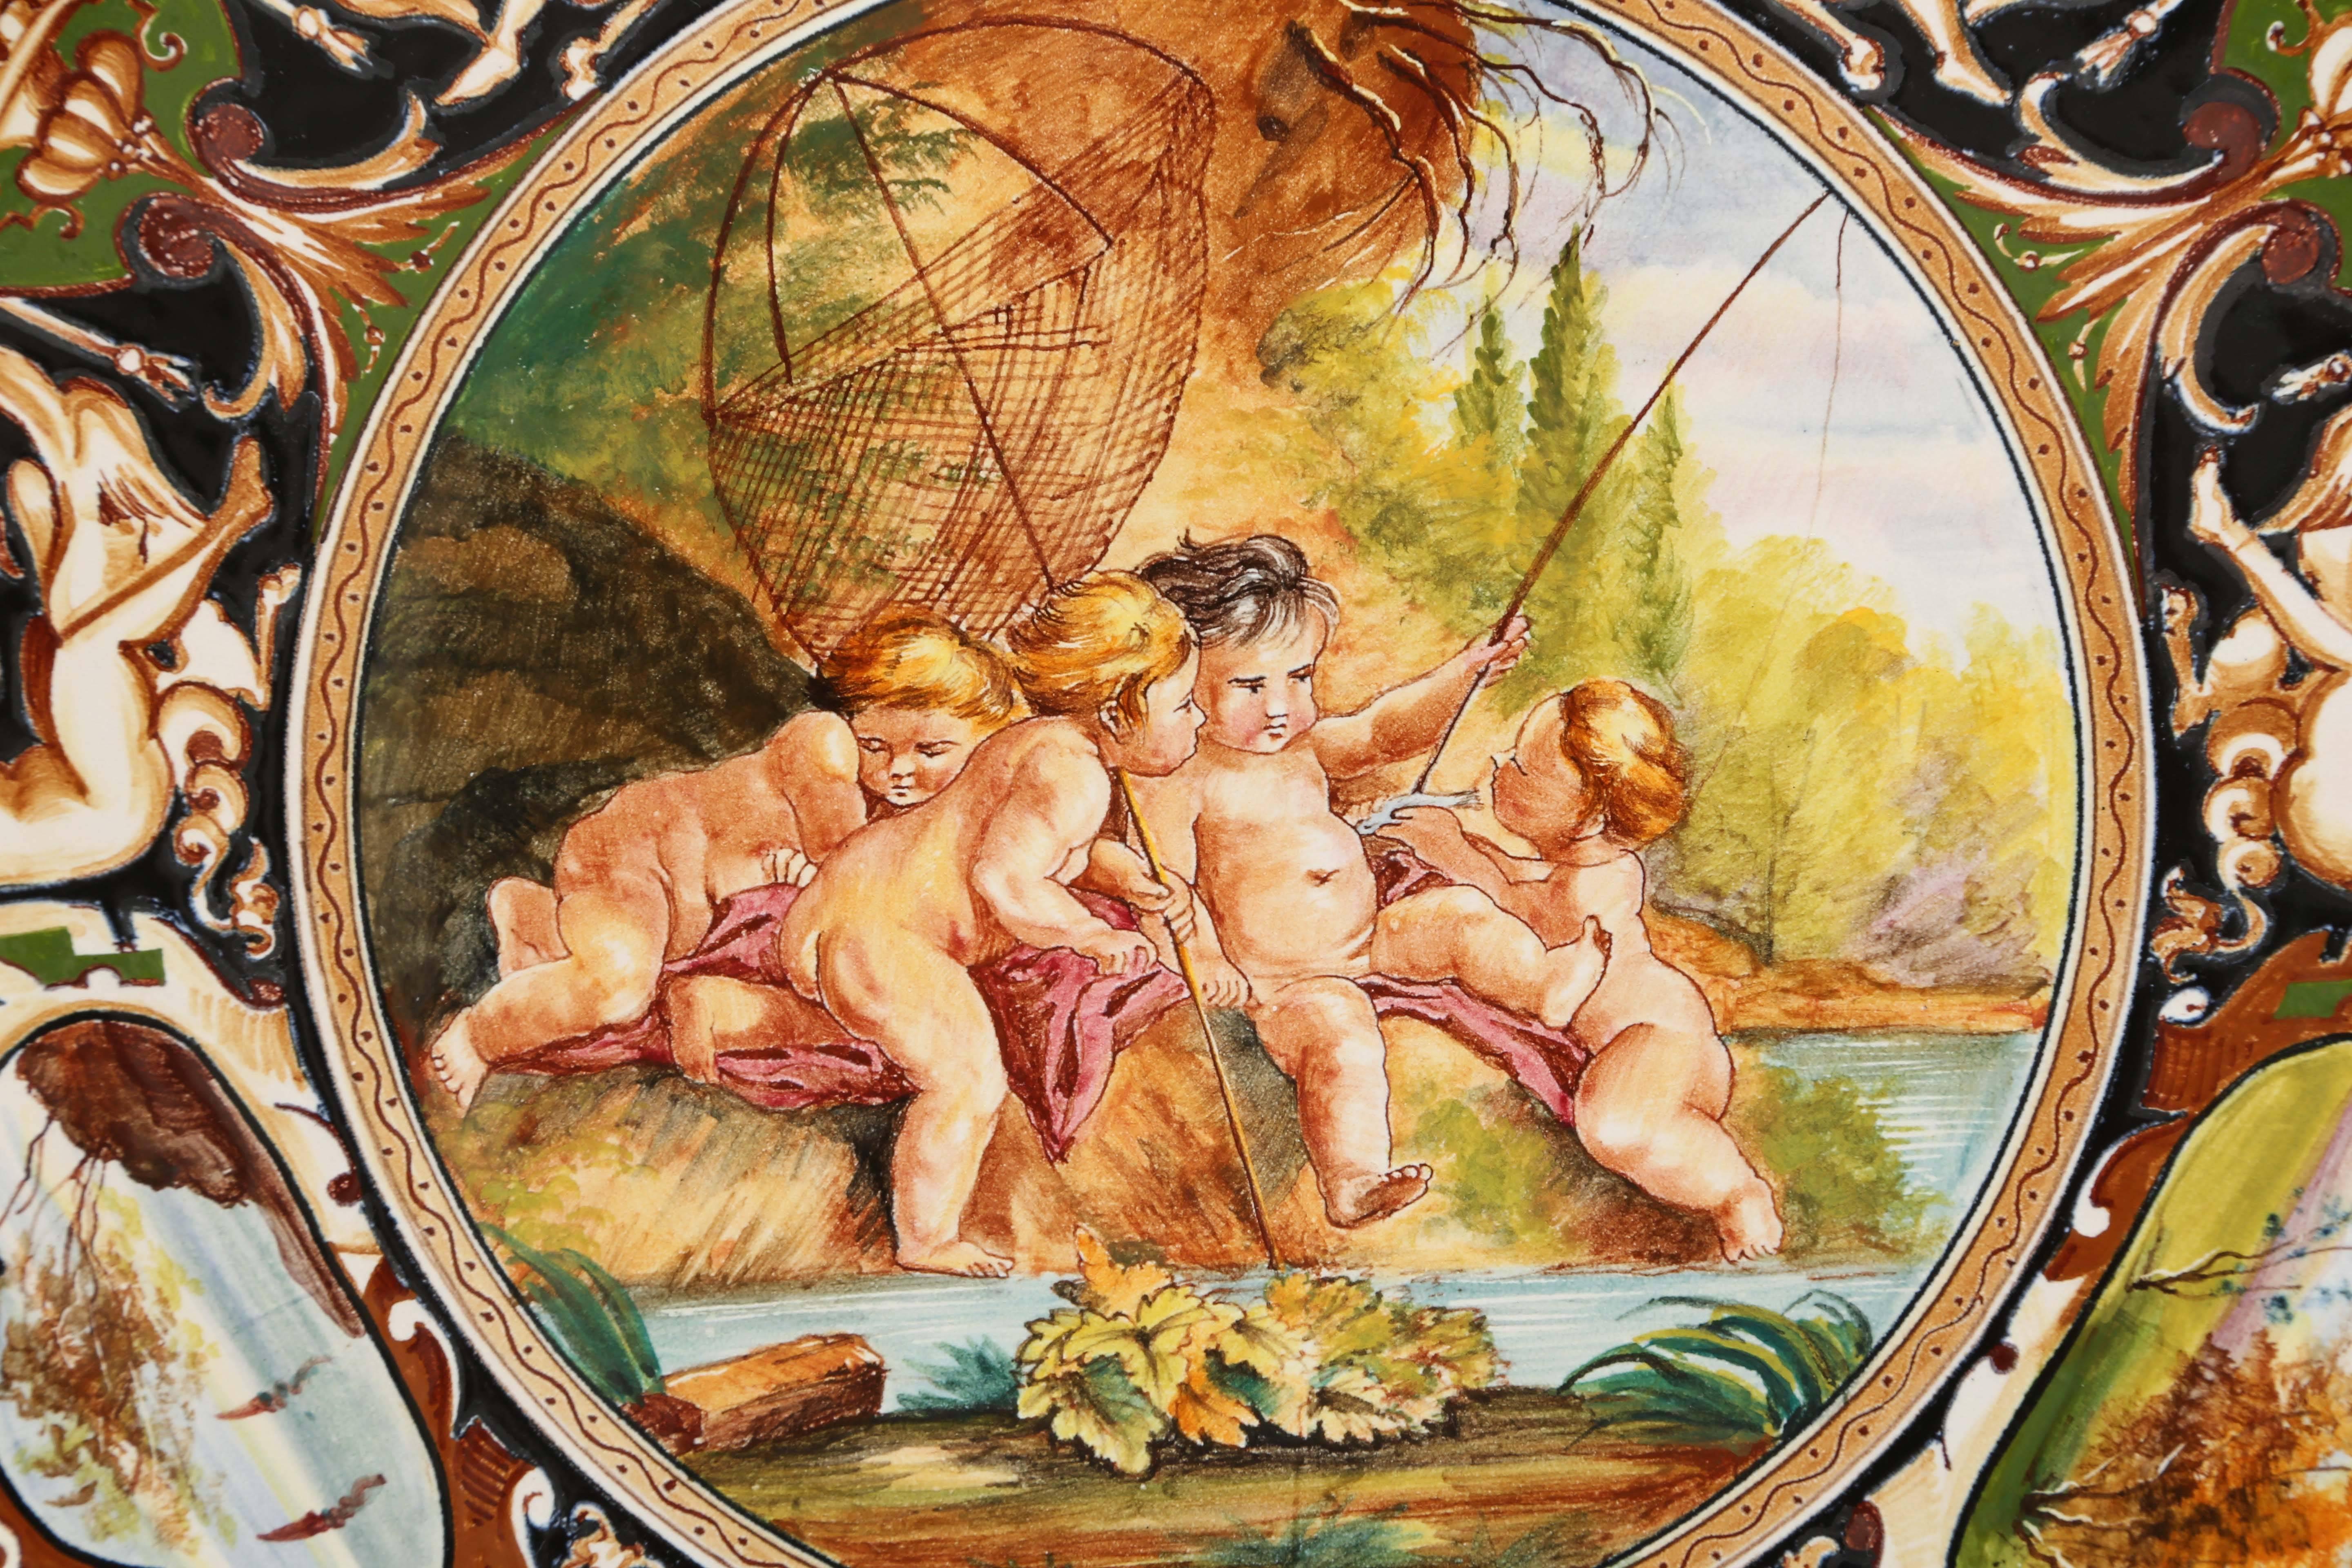 Delightful Italian majolica putti charger signed Boucher, Italy on underneath.